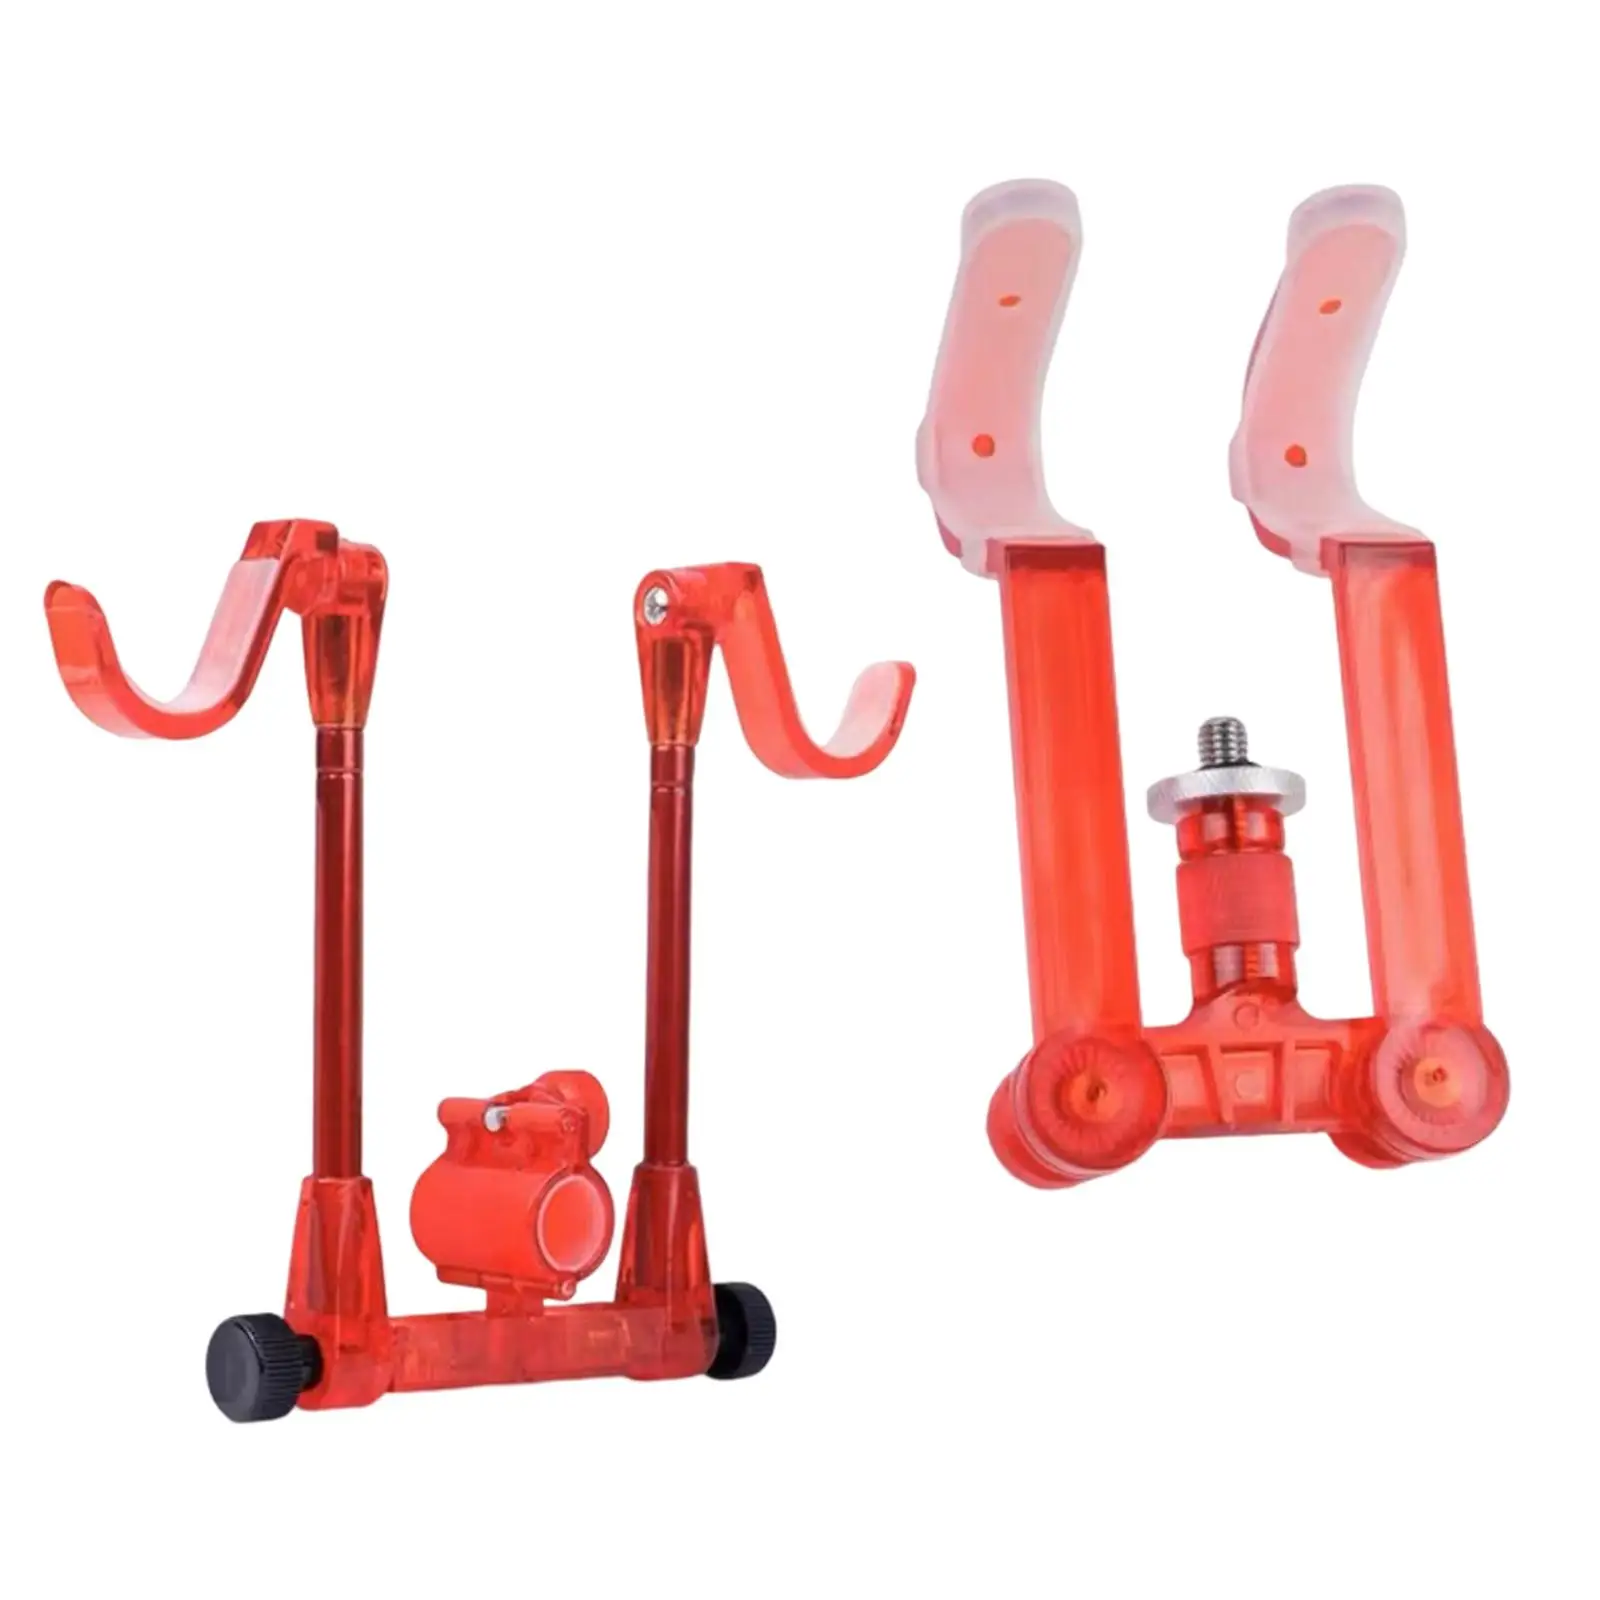 Fishing Rods Holder Rest Support Stand Tool Accessory Equipment Stand Fishing Rod Rack Stand for Fishing Outdoor Beach Men Pool